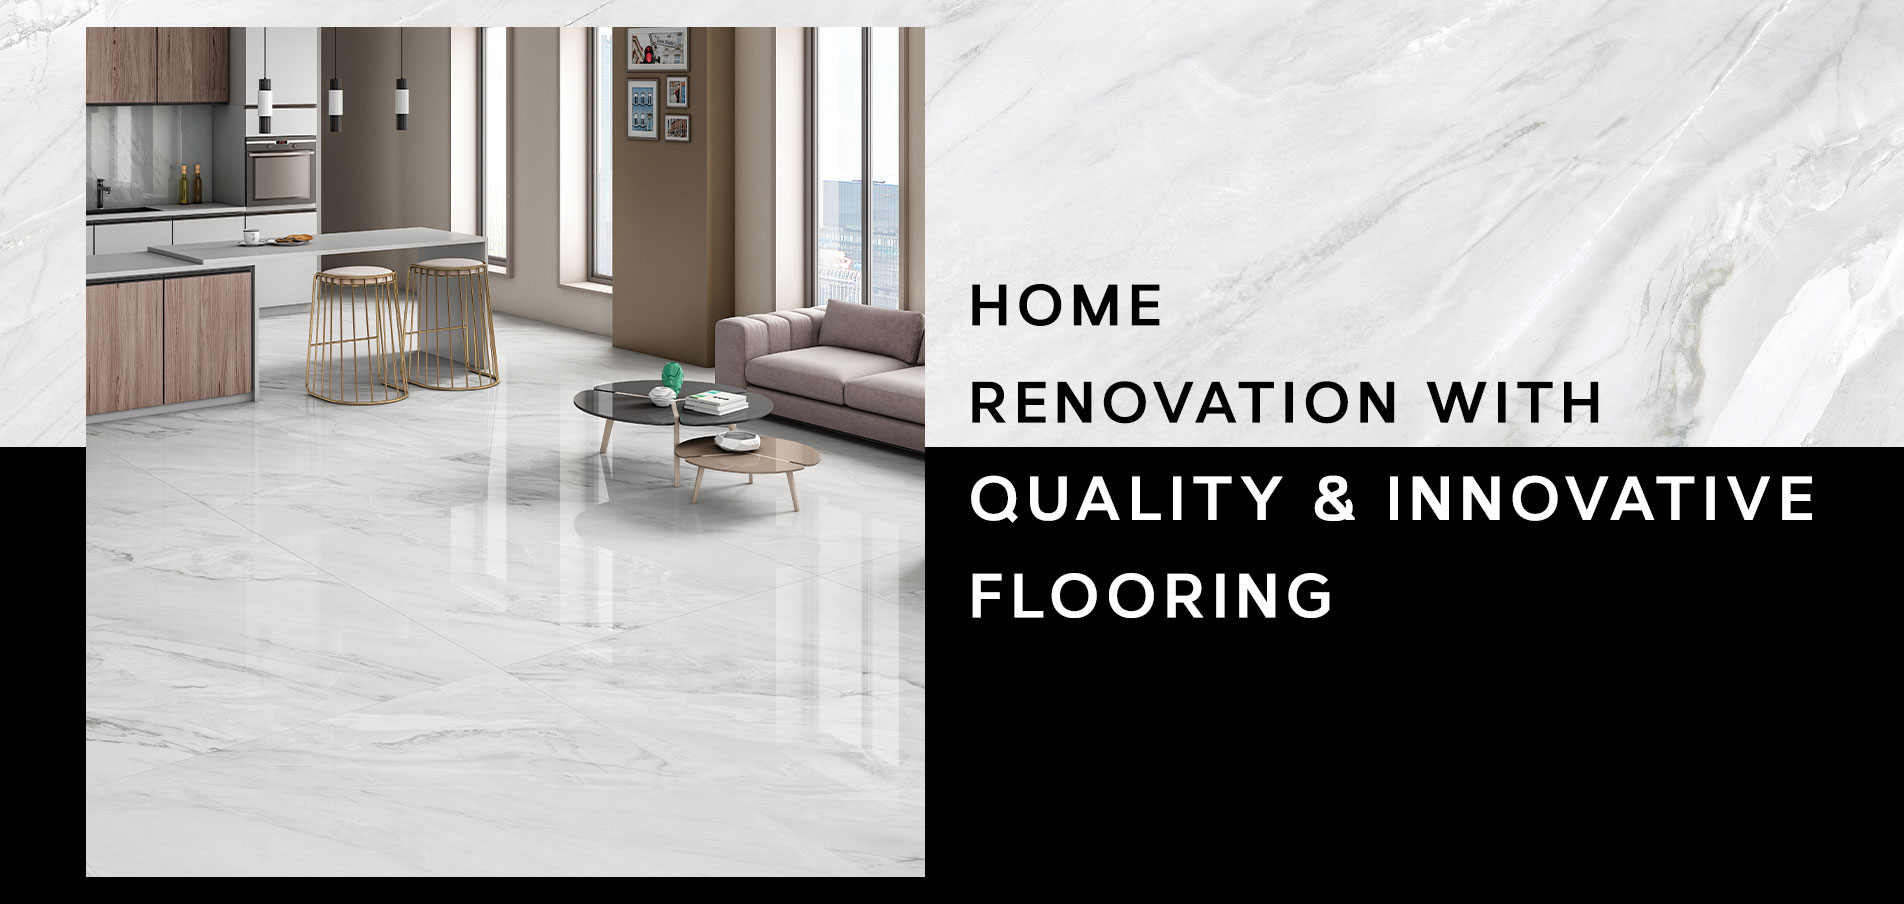 Home renovation with quality & innovative flooring